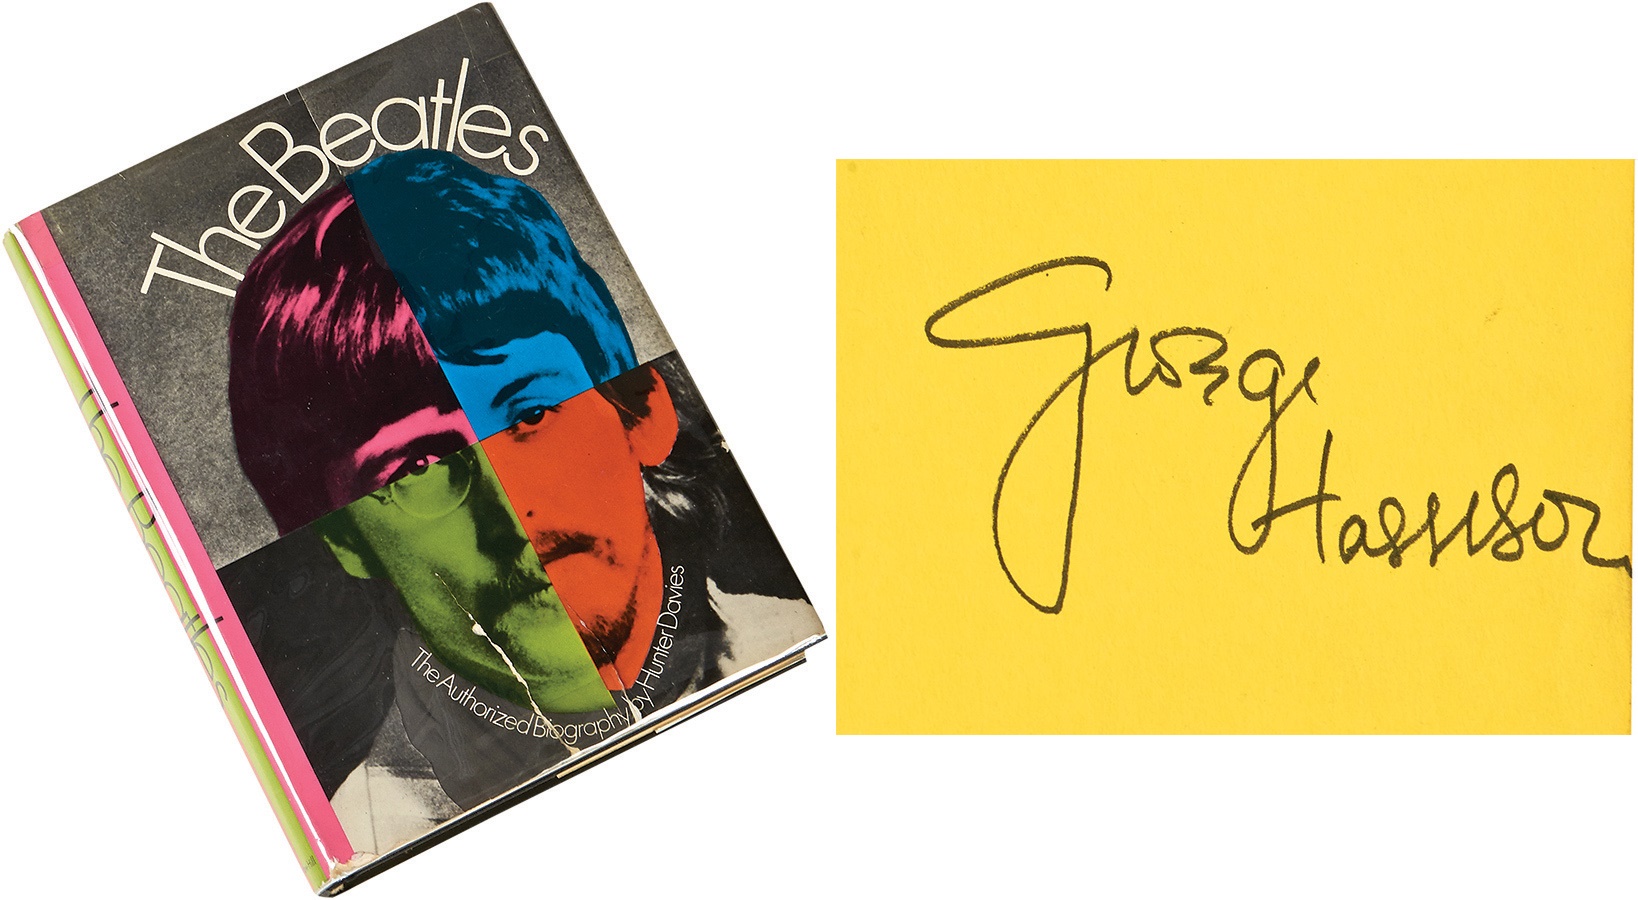 Rock 'N' Roll - George Harrison Signed The Beatles Authorized Biography (1968)